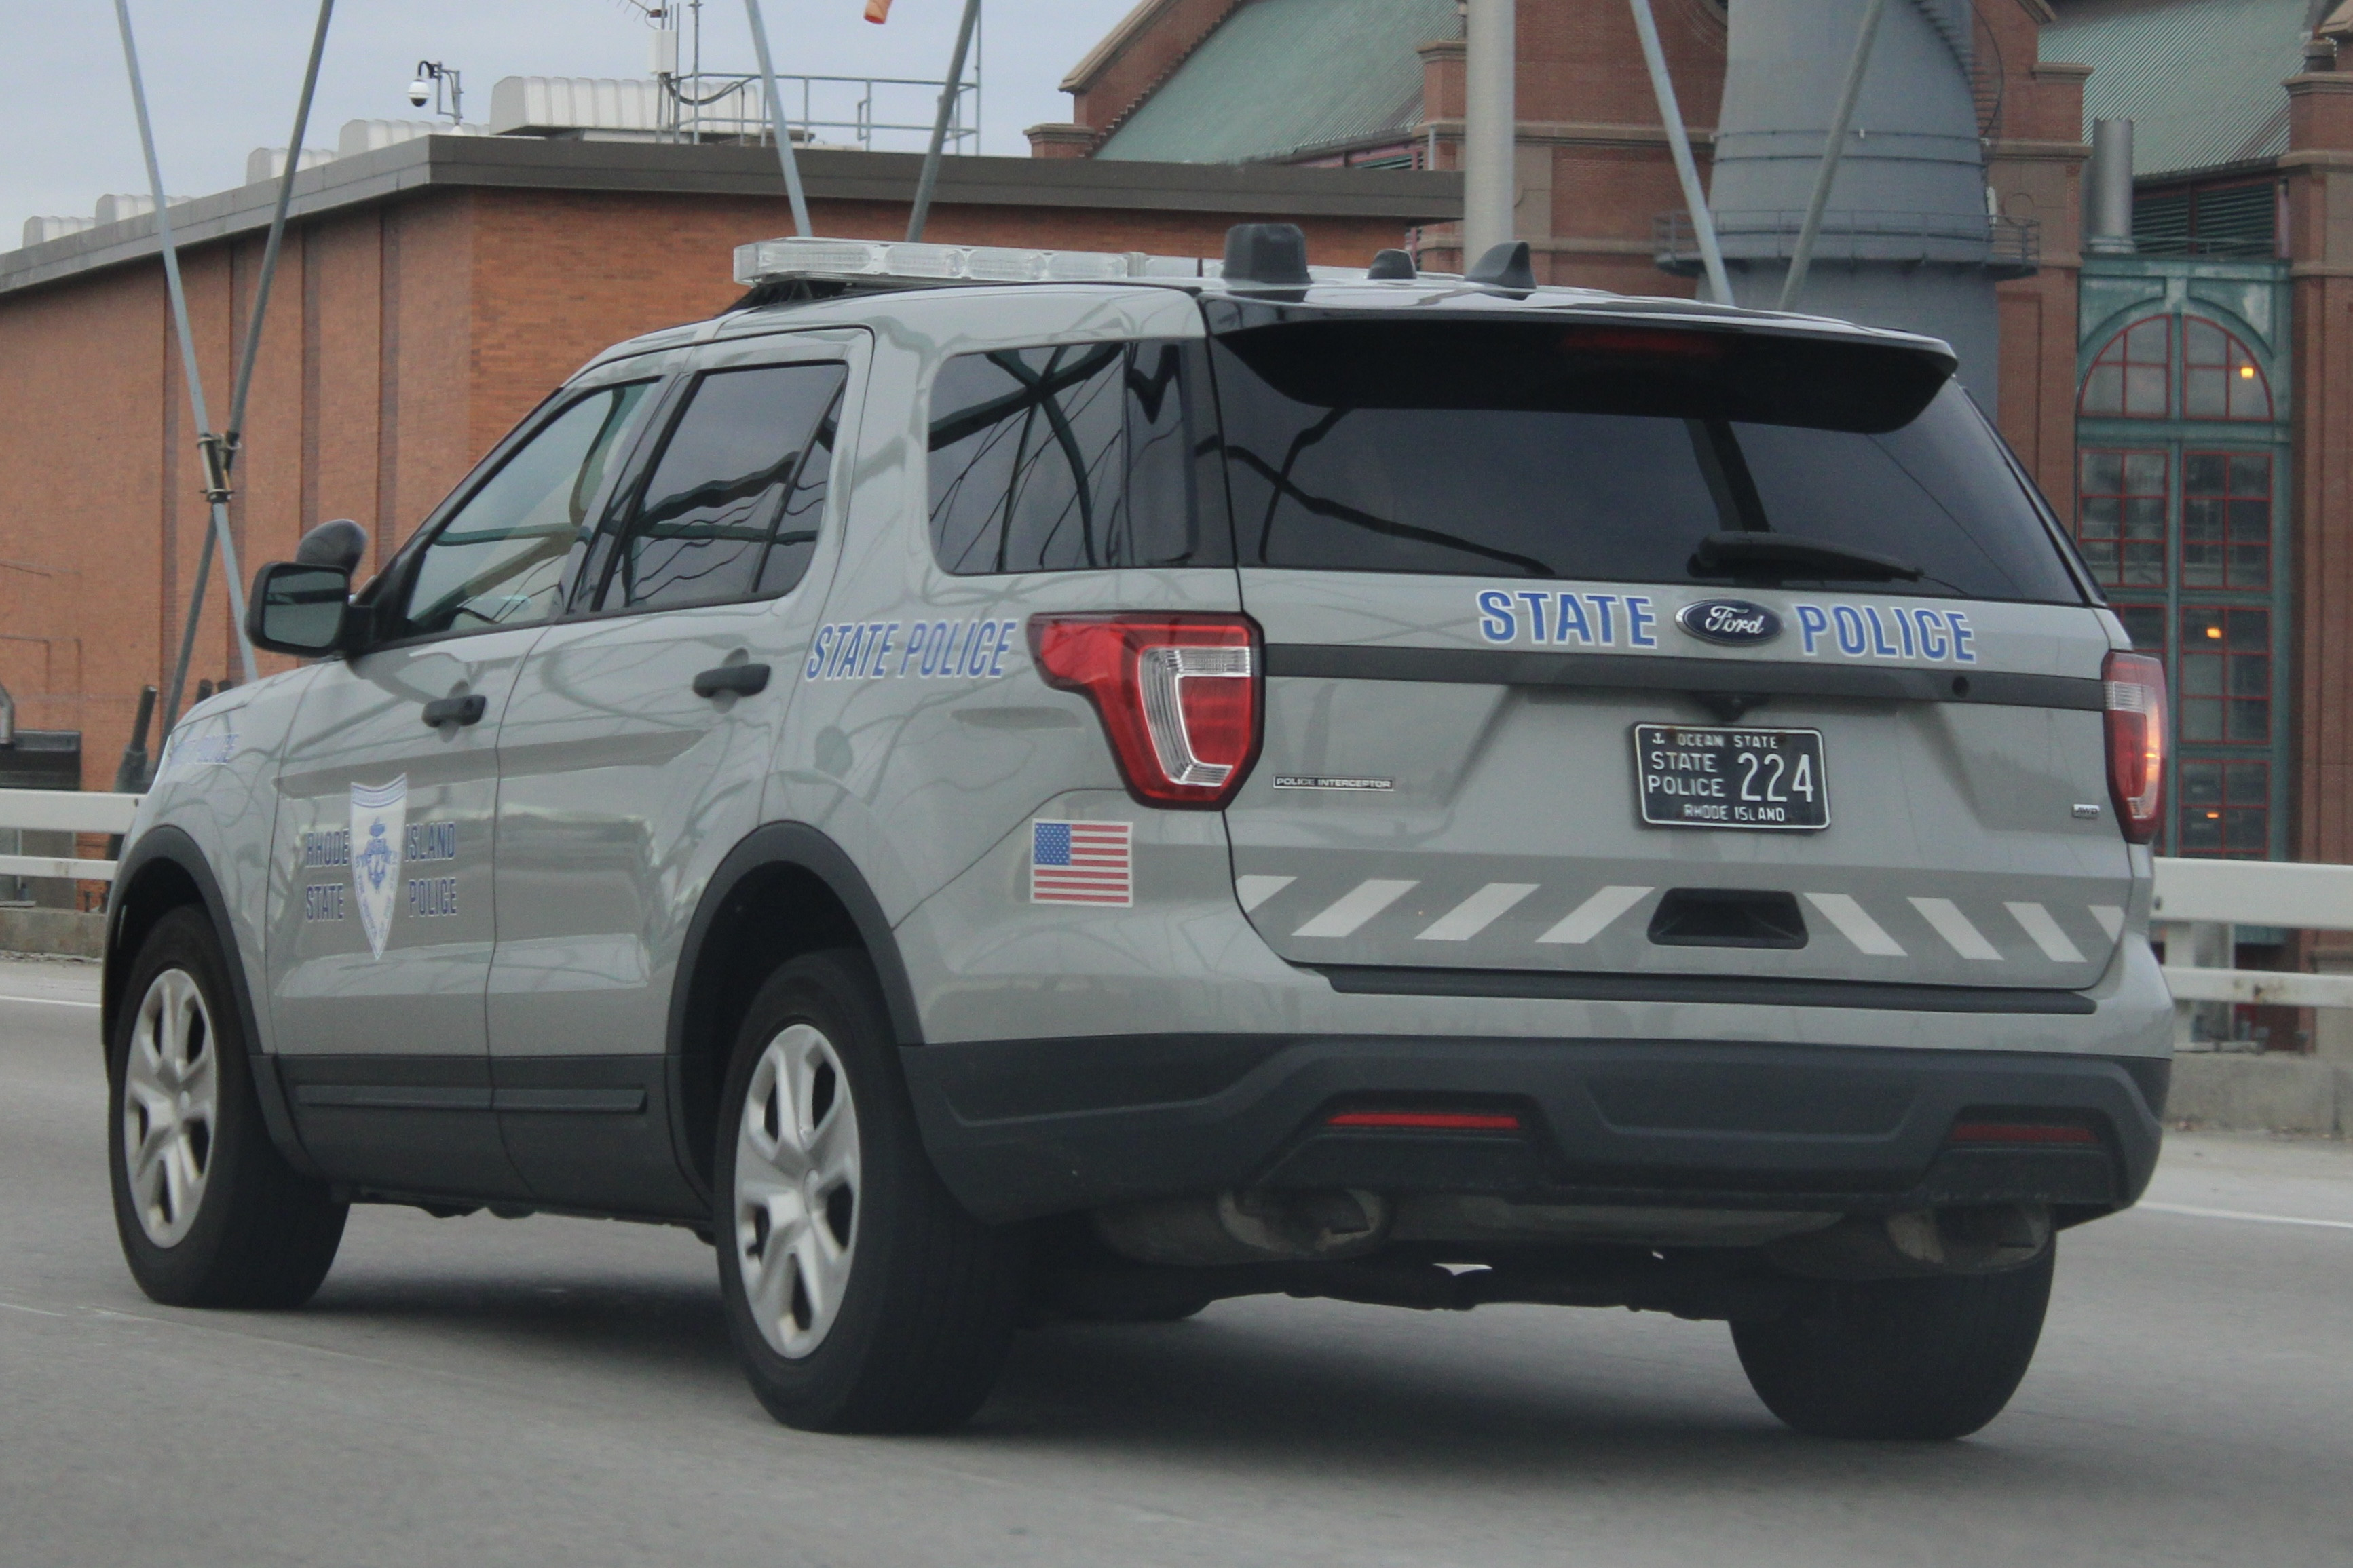 A photo  of Rhode Island State Police
            Cruiser 224, a 2016-2019 Ford Police Interceptor Utility             taken by @riemergencyvehicles